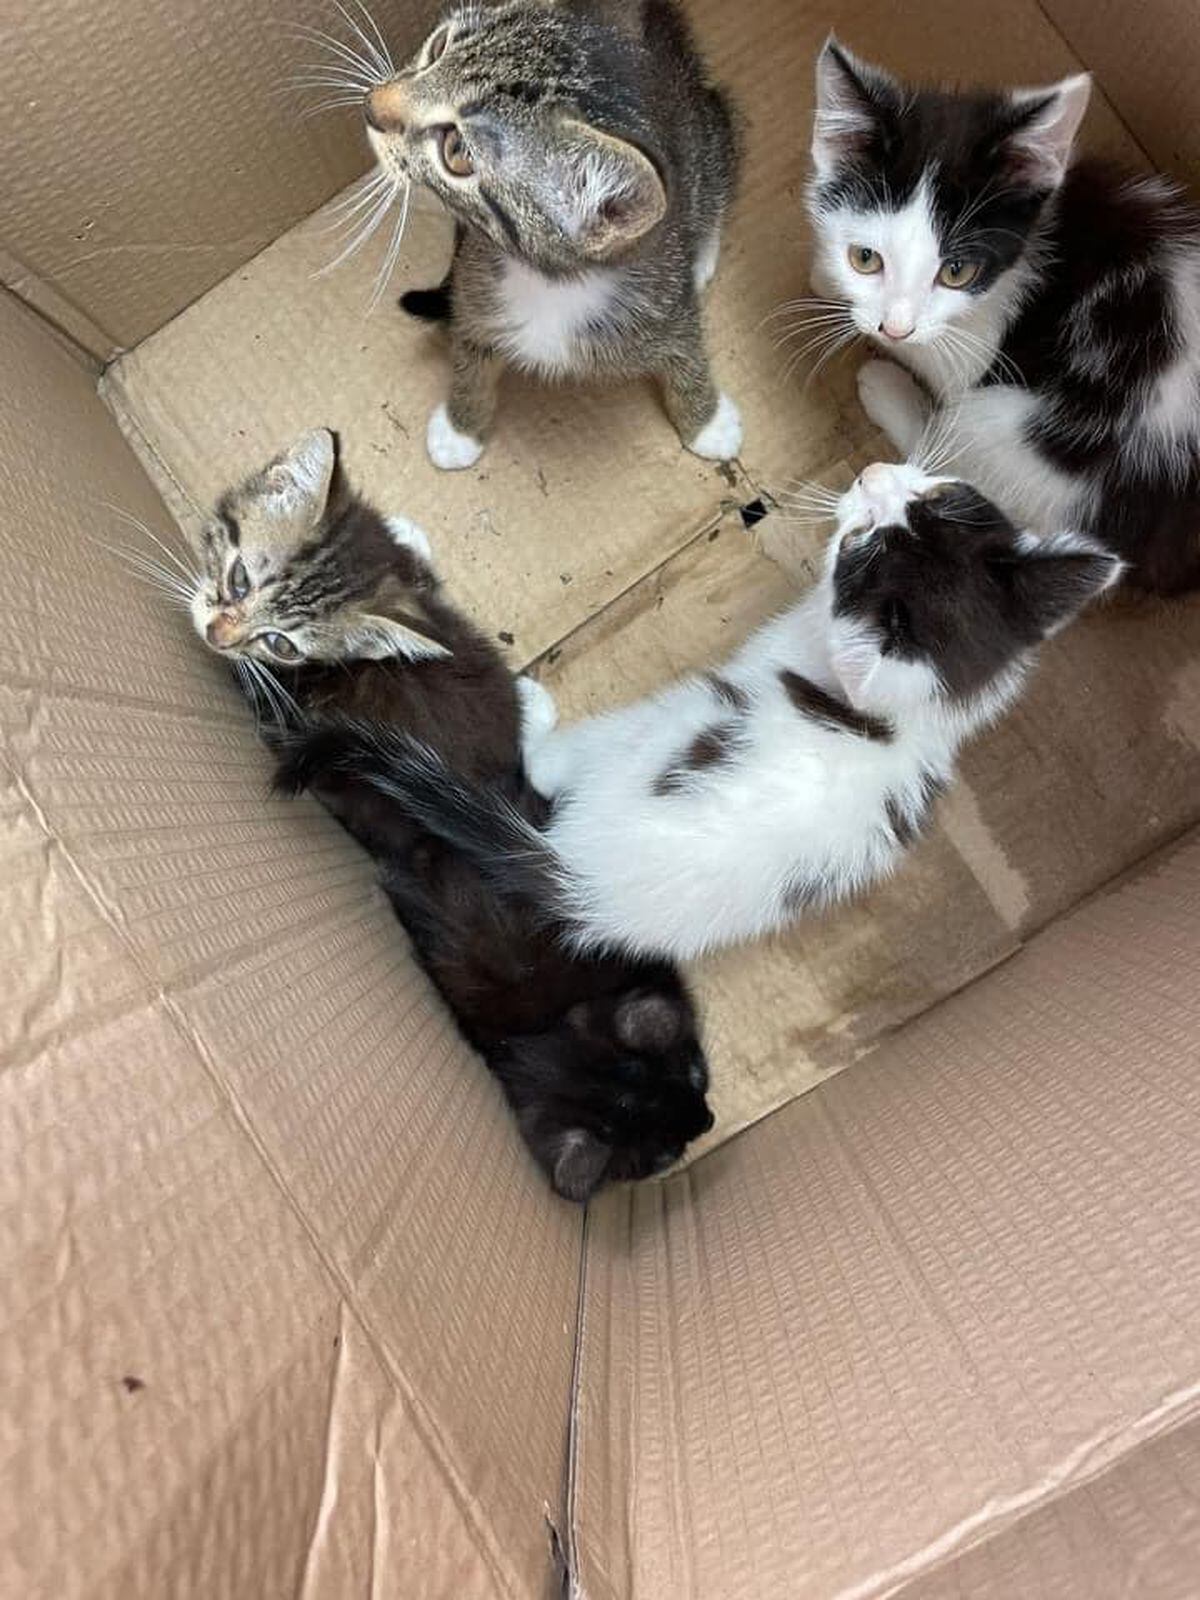 The kittens were found in a urine soaked cardboard box. Picture by Di Rhoden